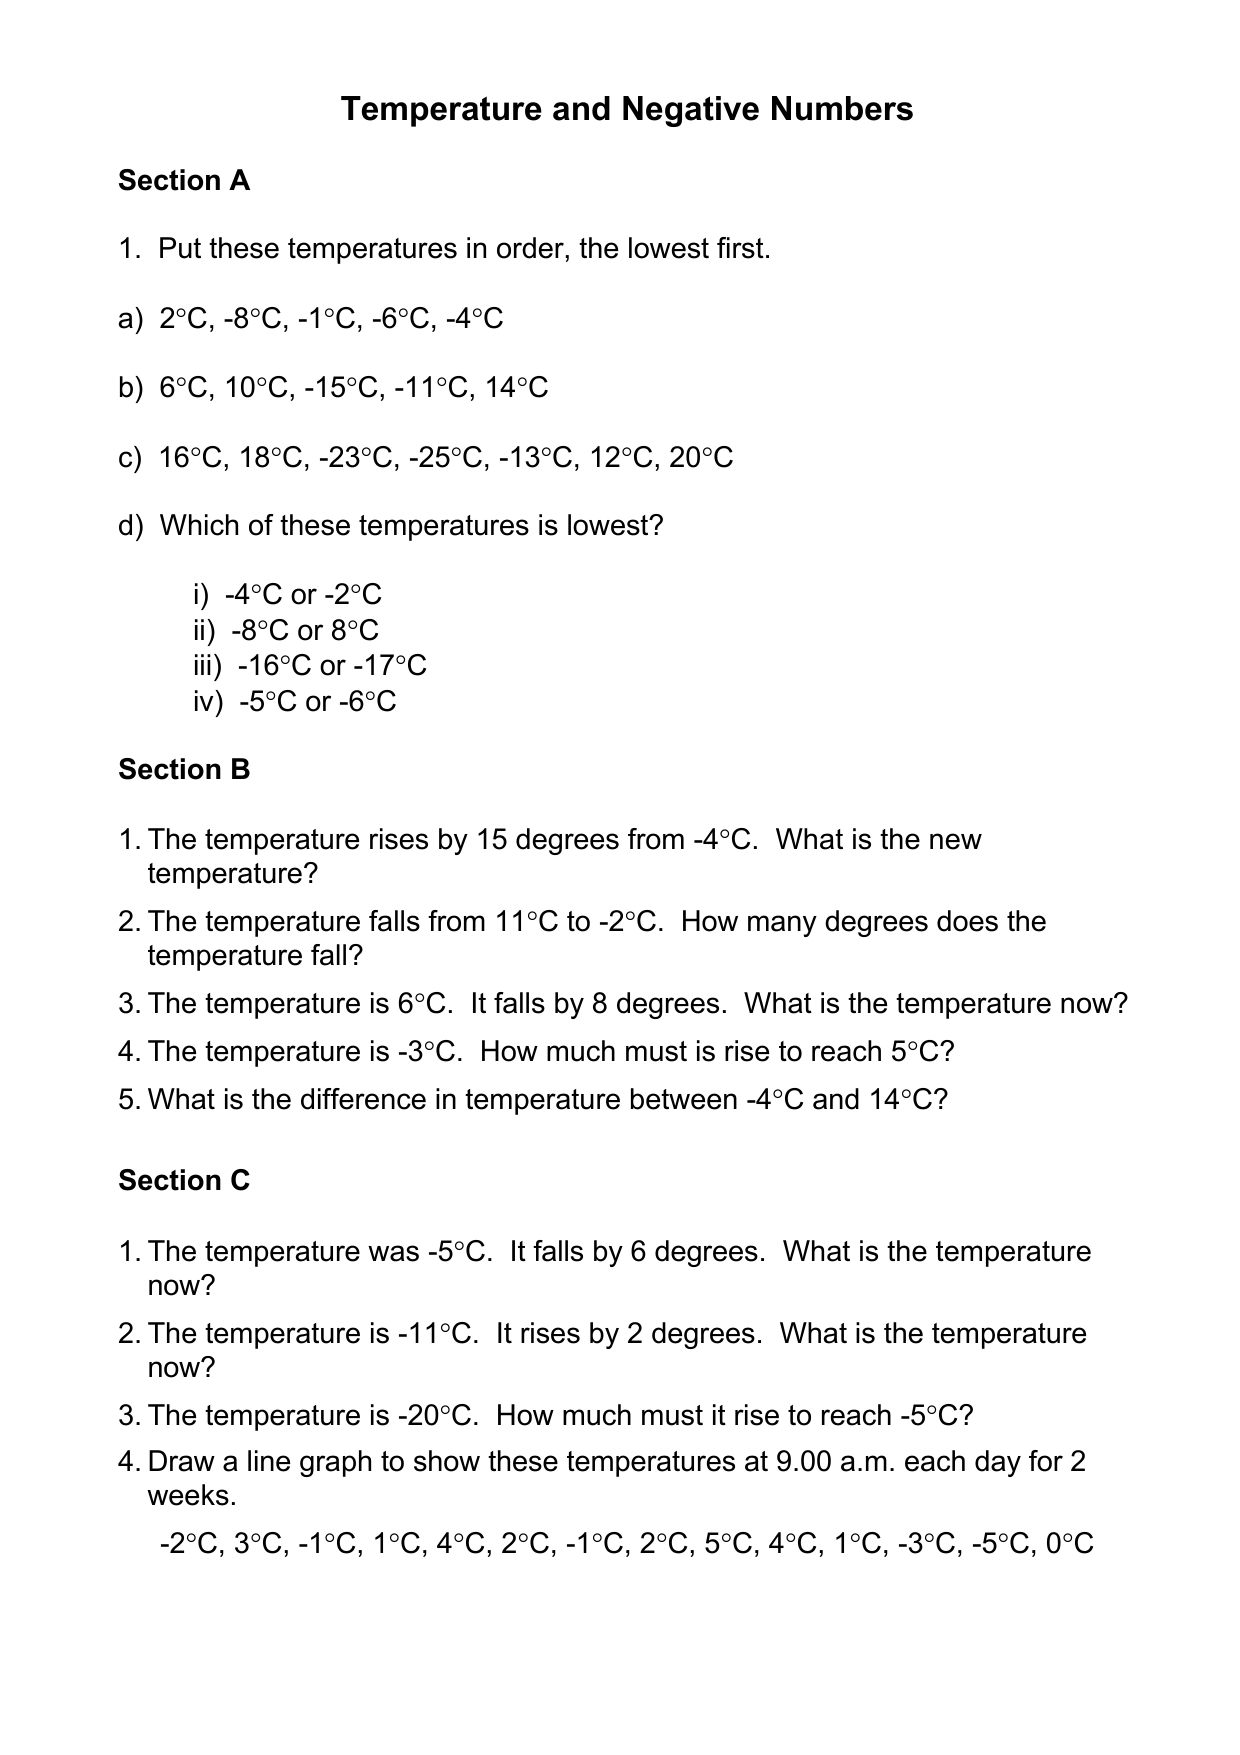 temperature-and-negative-numbers